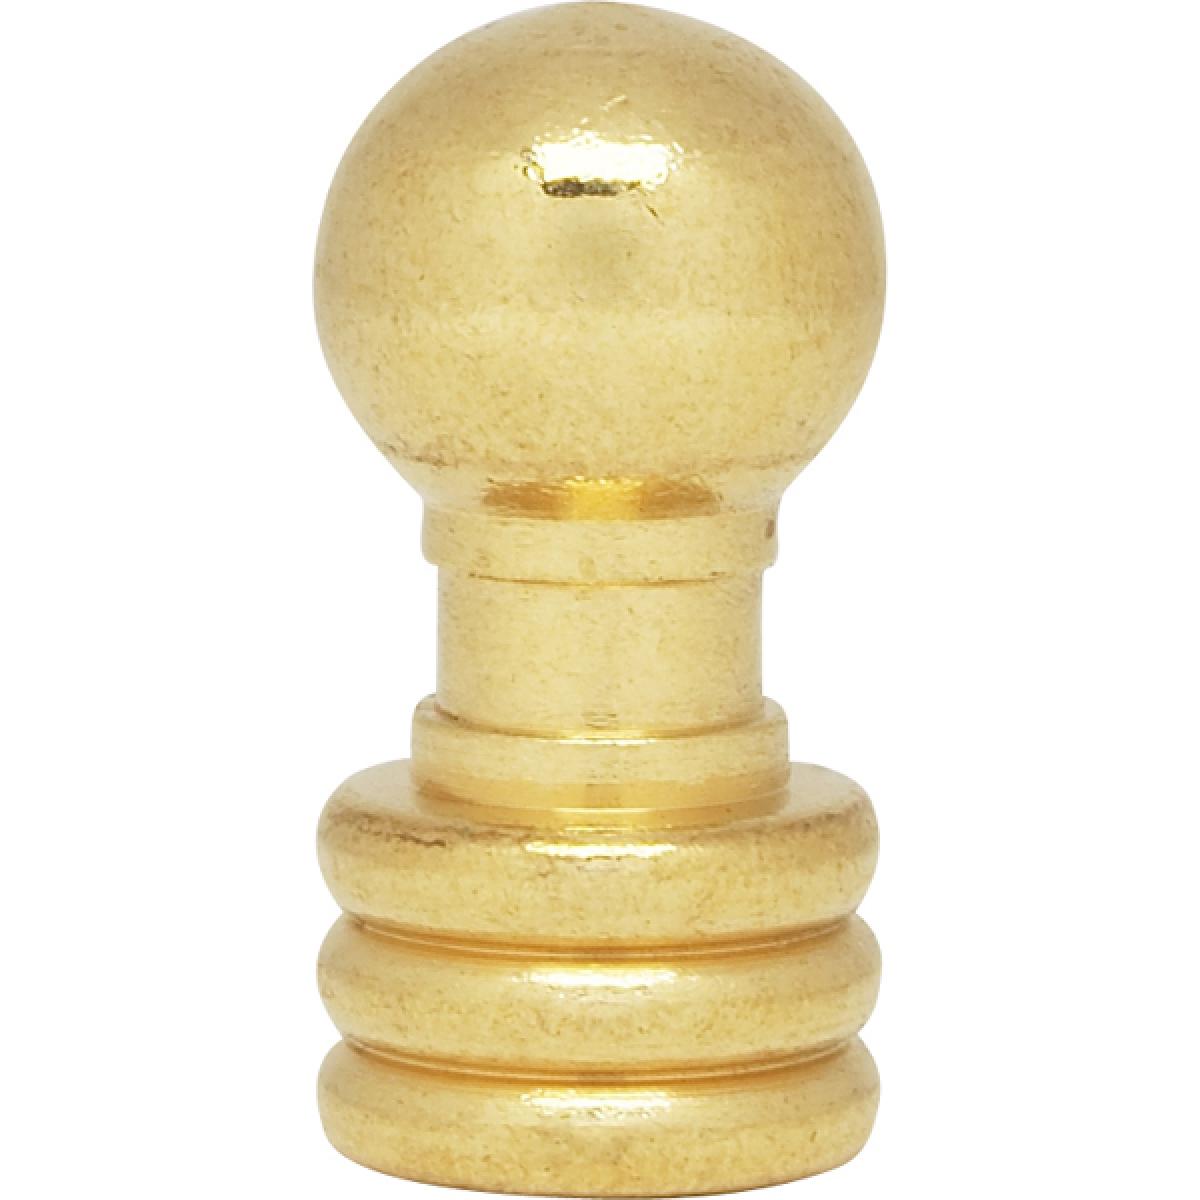 Satco 90-1386 Ball Knob Finial Burnished And Lacquered 1-1/8" Height 1/4-27